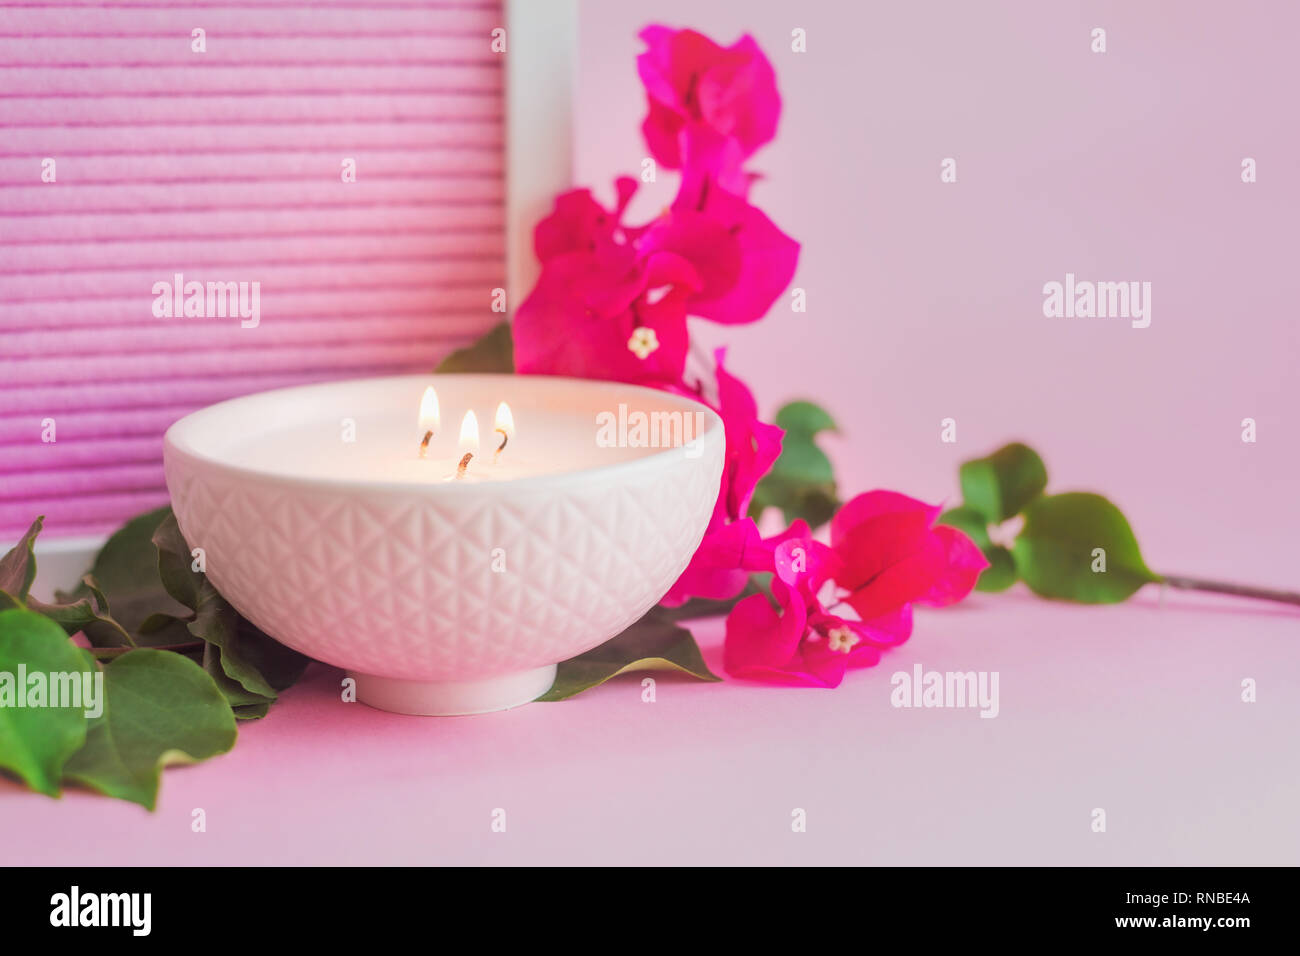 pink ceramic bowl with candle, and pink flower, on a pink background Stock Photo